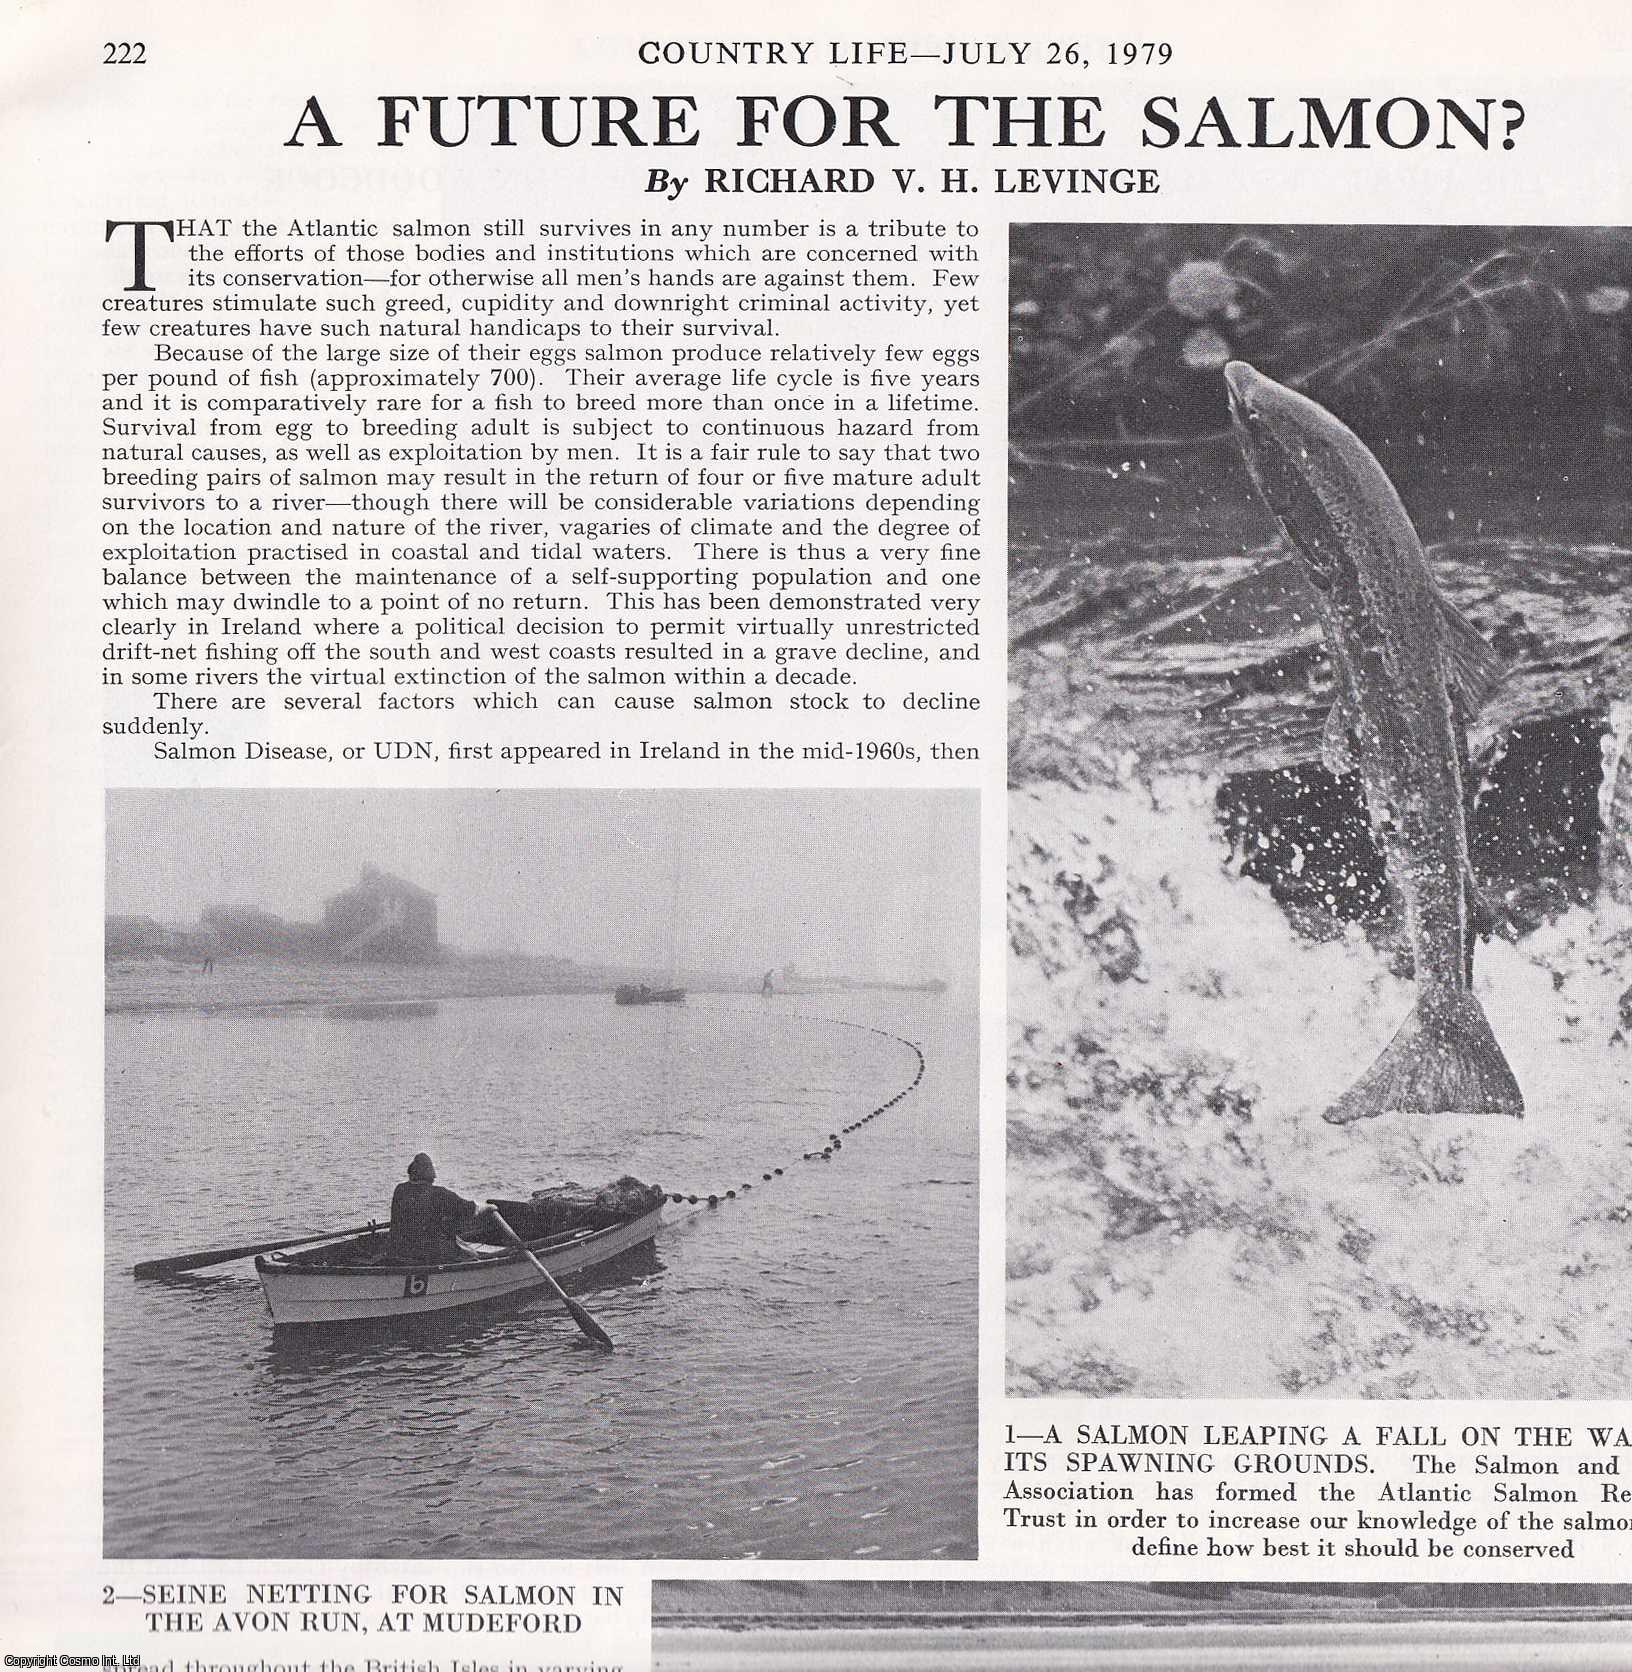 Richard V.H. Levinge - A Future for the Salmon? Several pictures and accompanying text, removed from an original issue of Country Life Magazine, 1979.